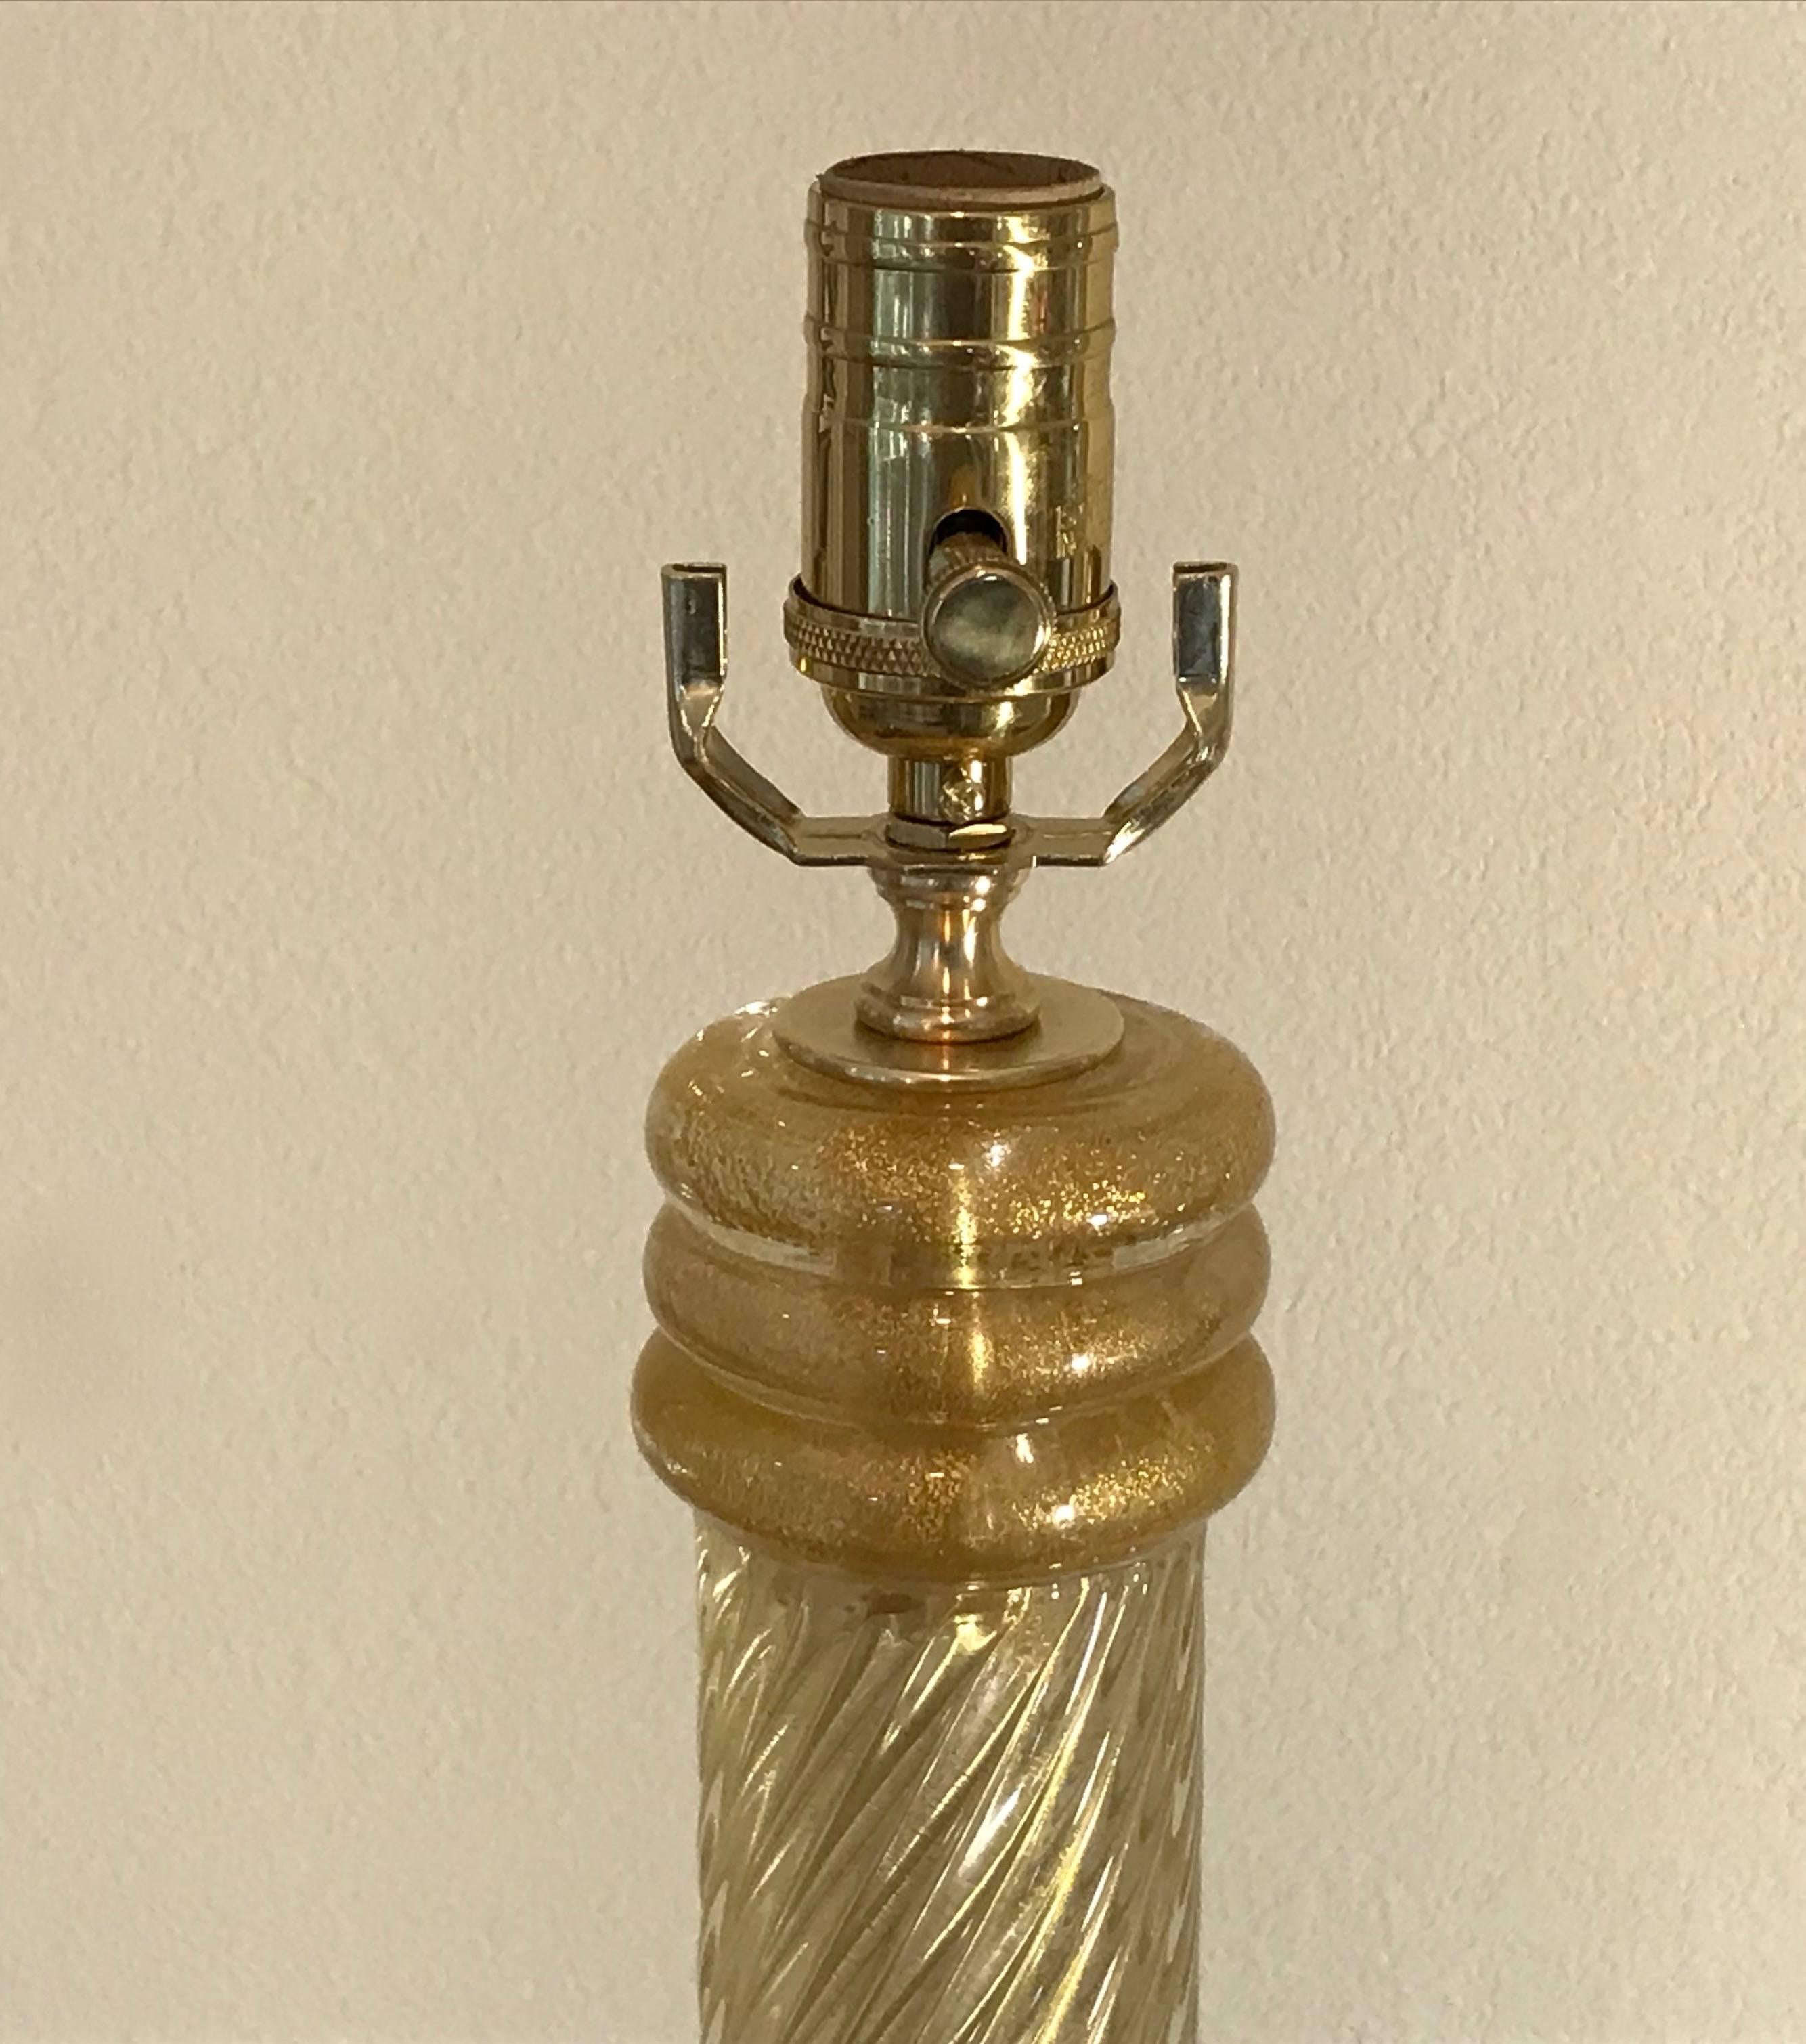 A very tall Italian Murano glass lamp composed of clear spiral ribs glass infused with 23 karat gold inclusions. Newly wired for US on custom acrylic base with full range dimmer socket, brass fittings and French style rayon covered